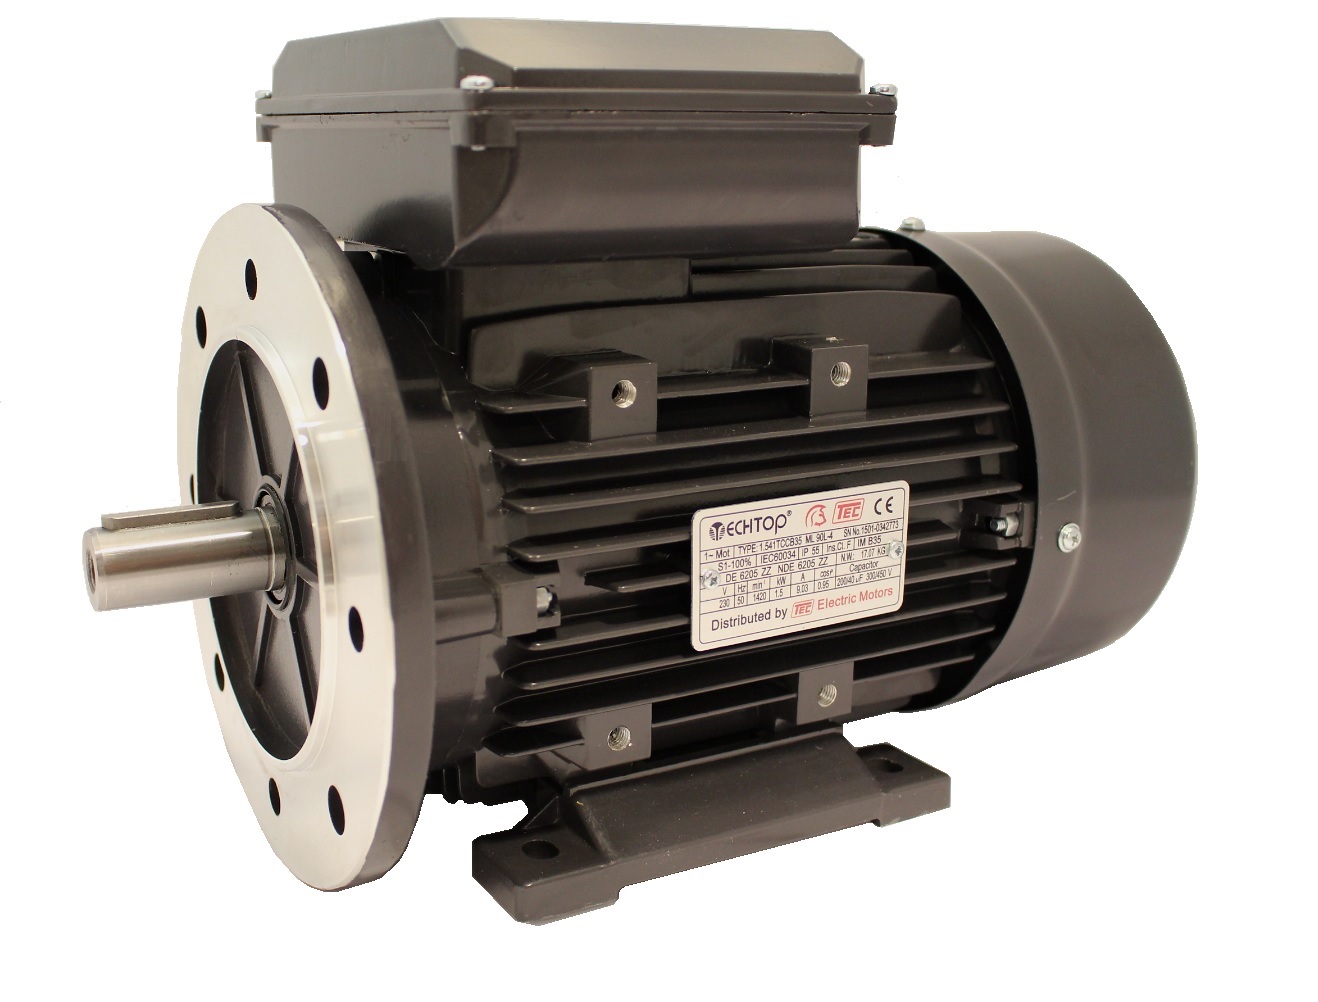 Single Phase 230v Electric Motor, 2.2Kw 2 pole 3000rpm with flange and foot mount